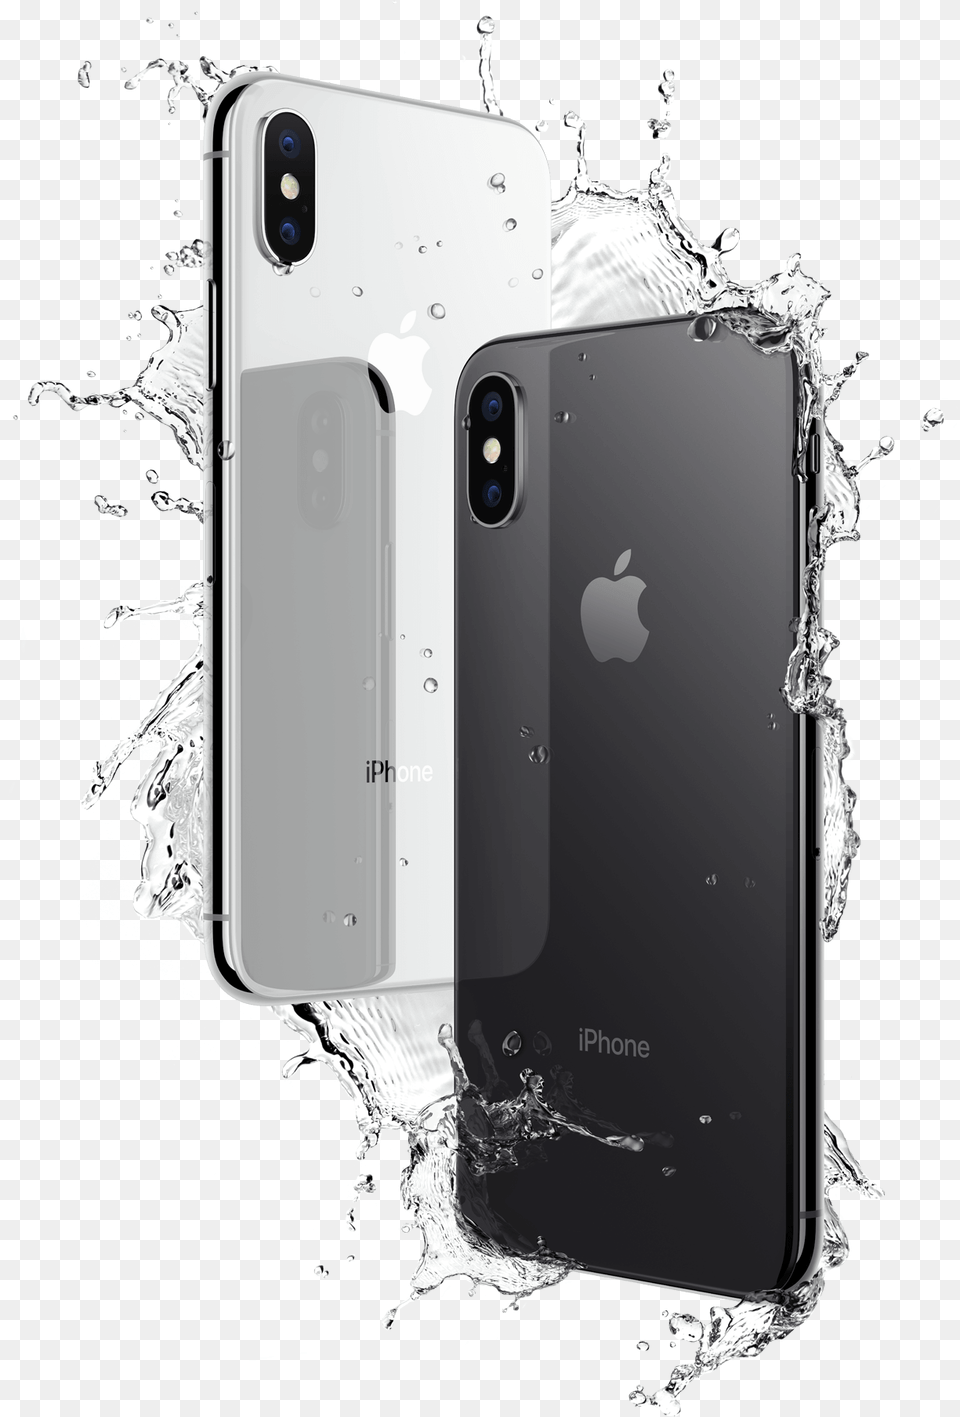 Apple Iphone X The Good Guys Iphone Xs Space Grey Vs Silver, Electronics, Mobile Phone, Phone Png Image